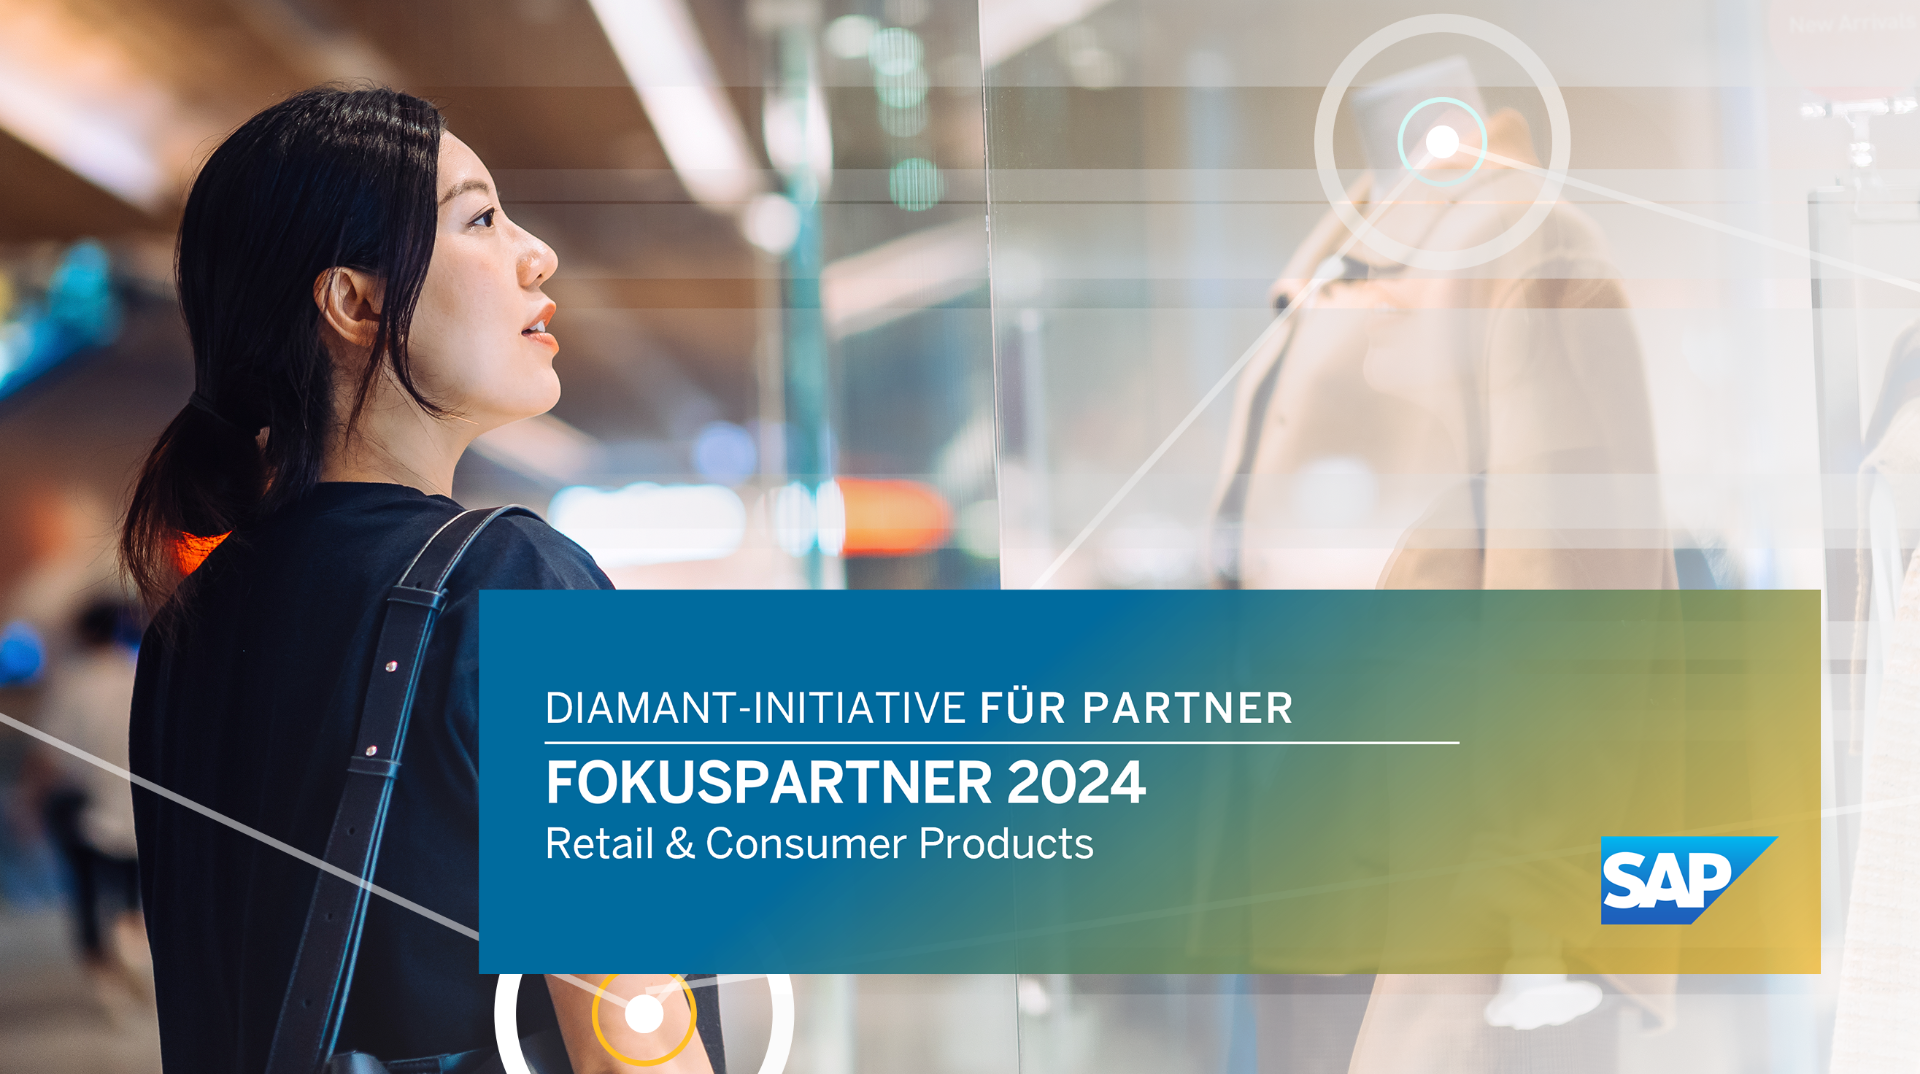 Focus partner for Retail & Consumer Products as part of the SAP Diamond Initiative 